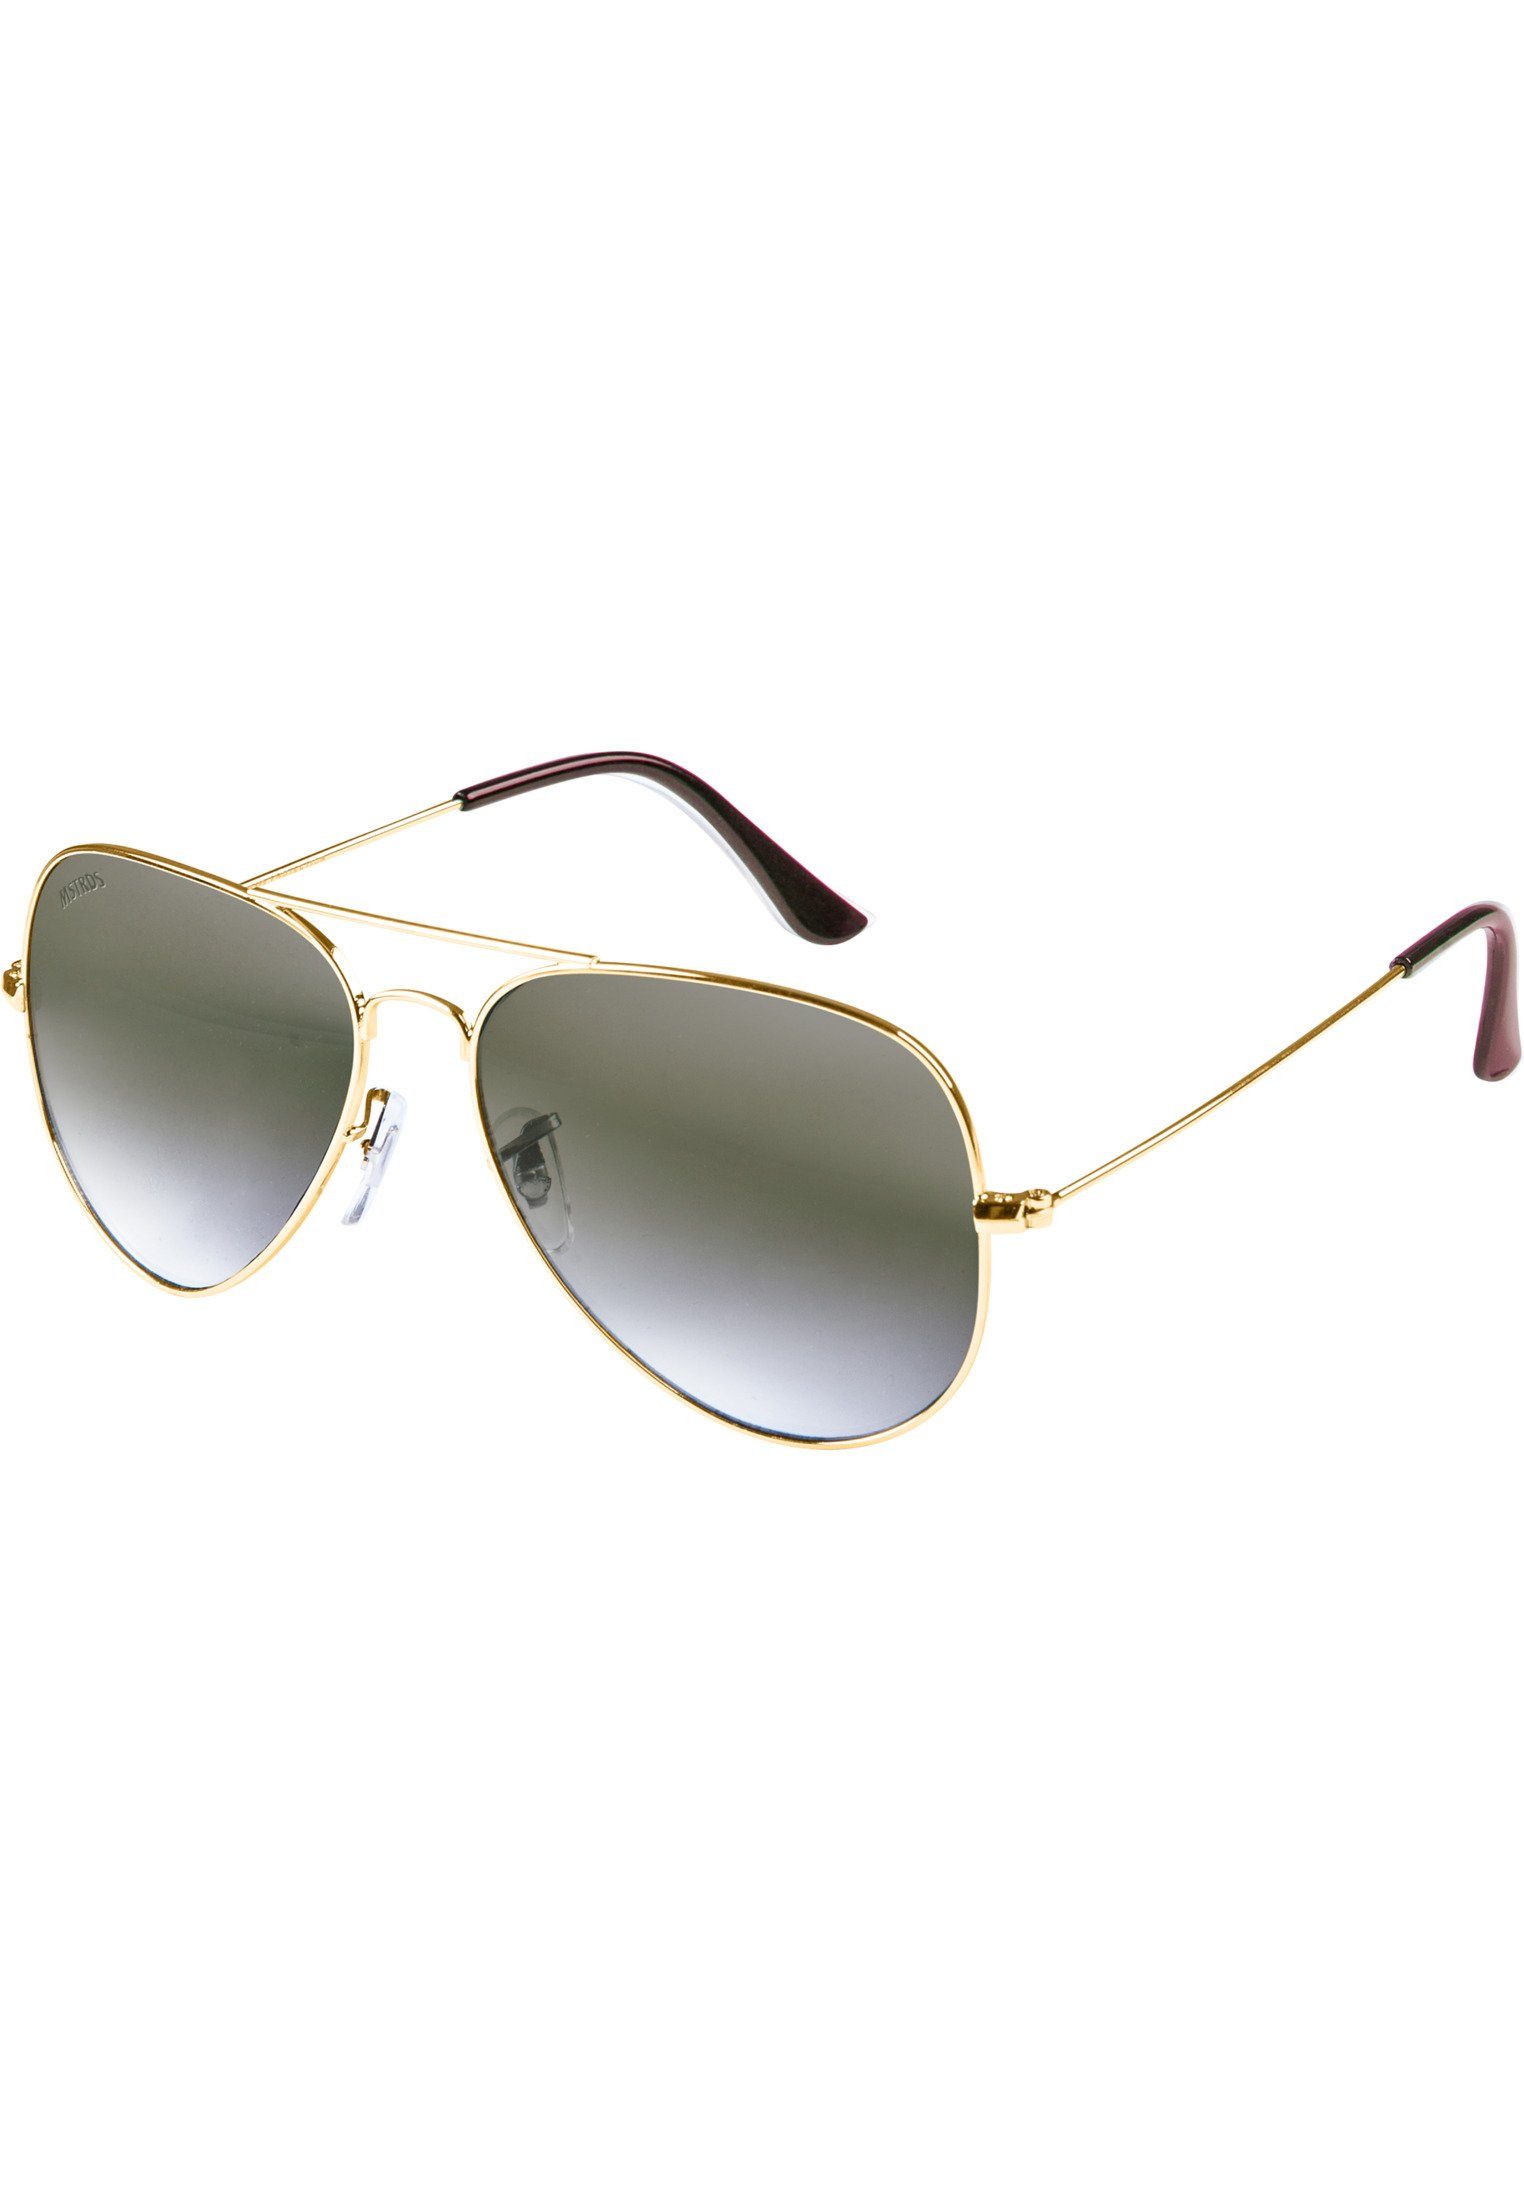 Sunglasses MSTRDS Accessoires PureAv Sonnenbrille gold/grey Youth